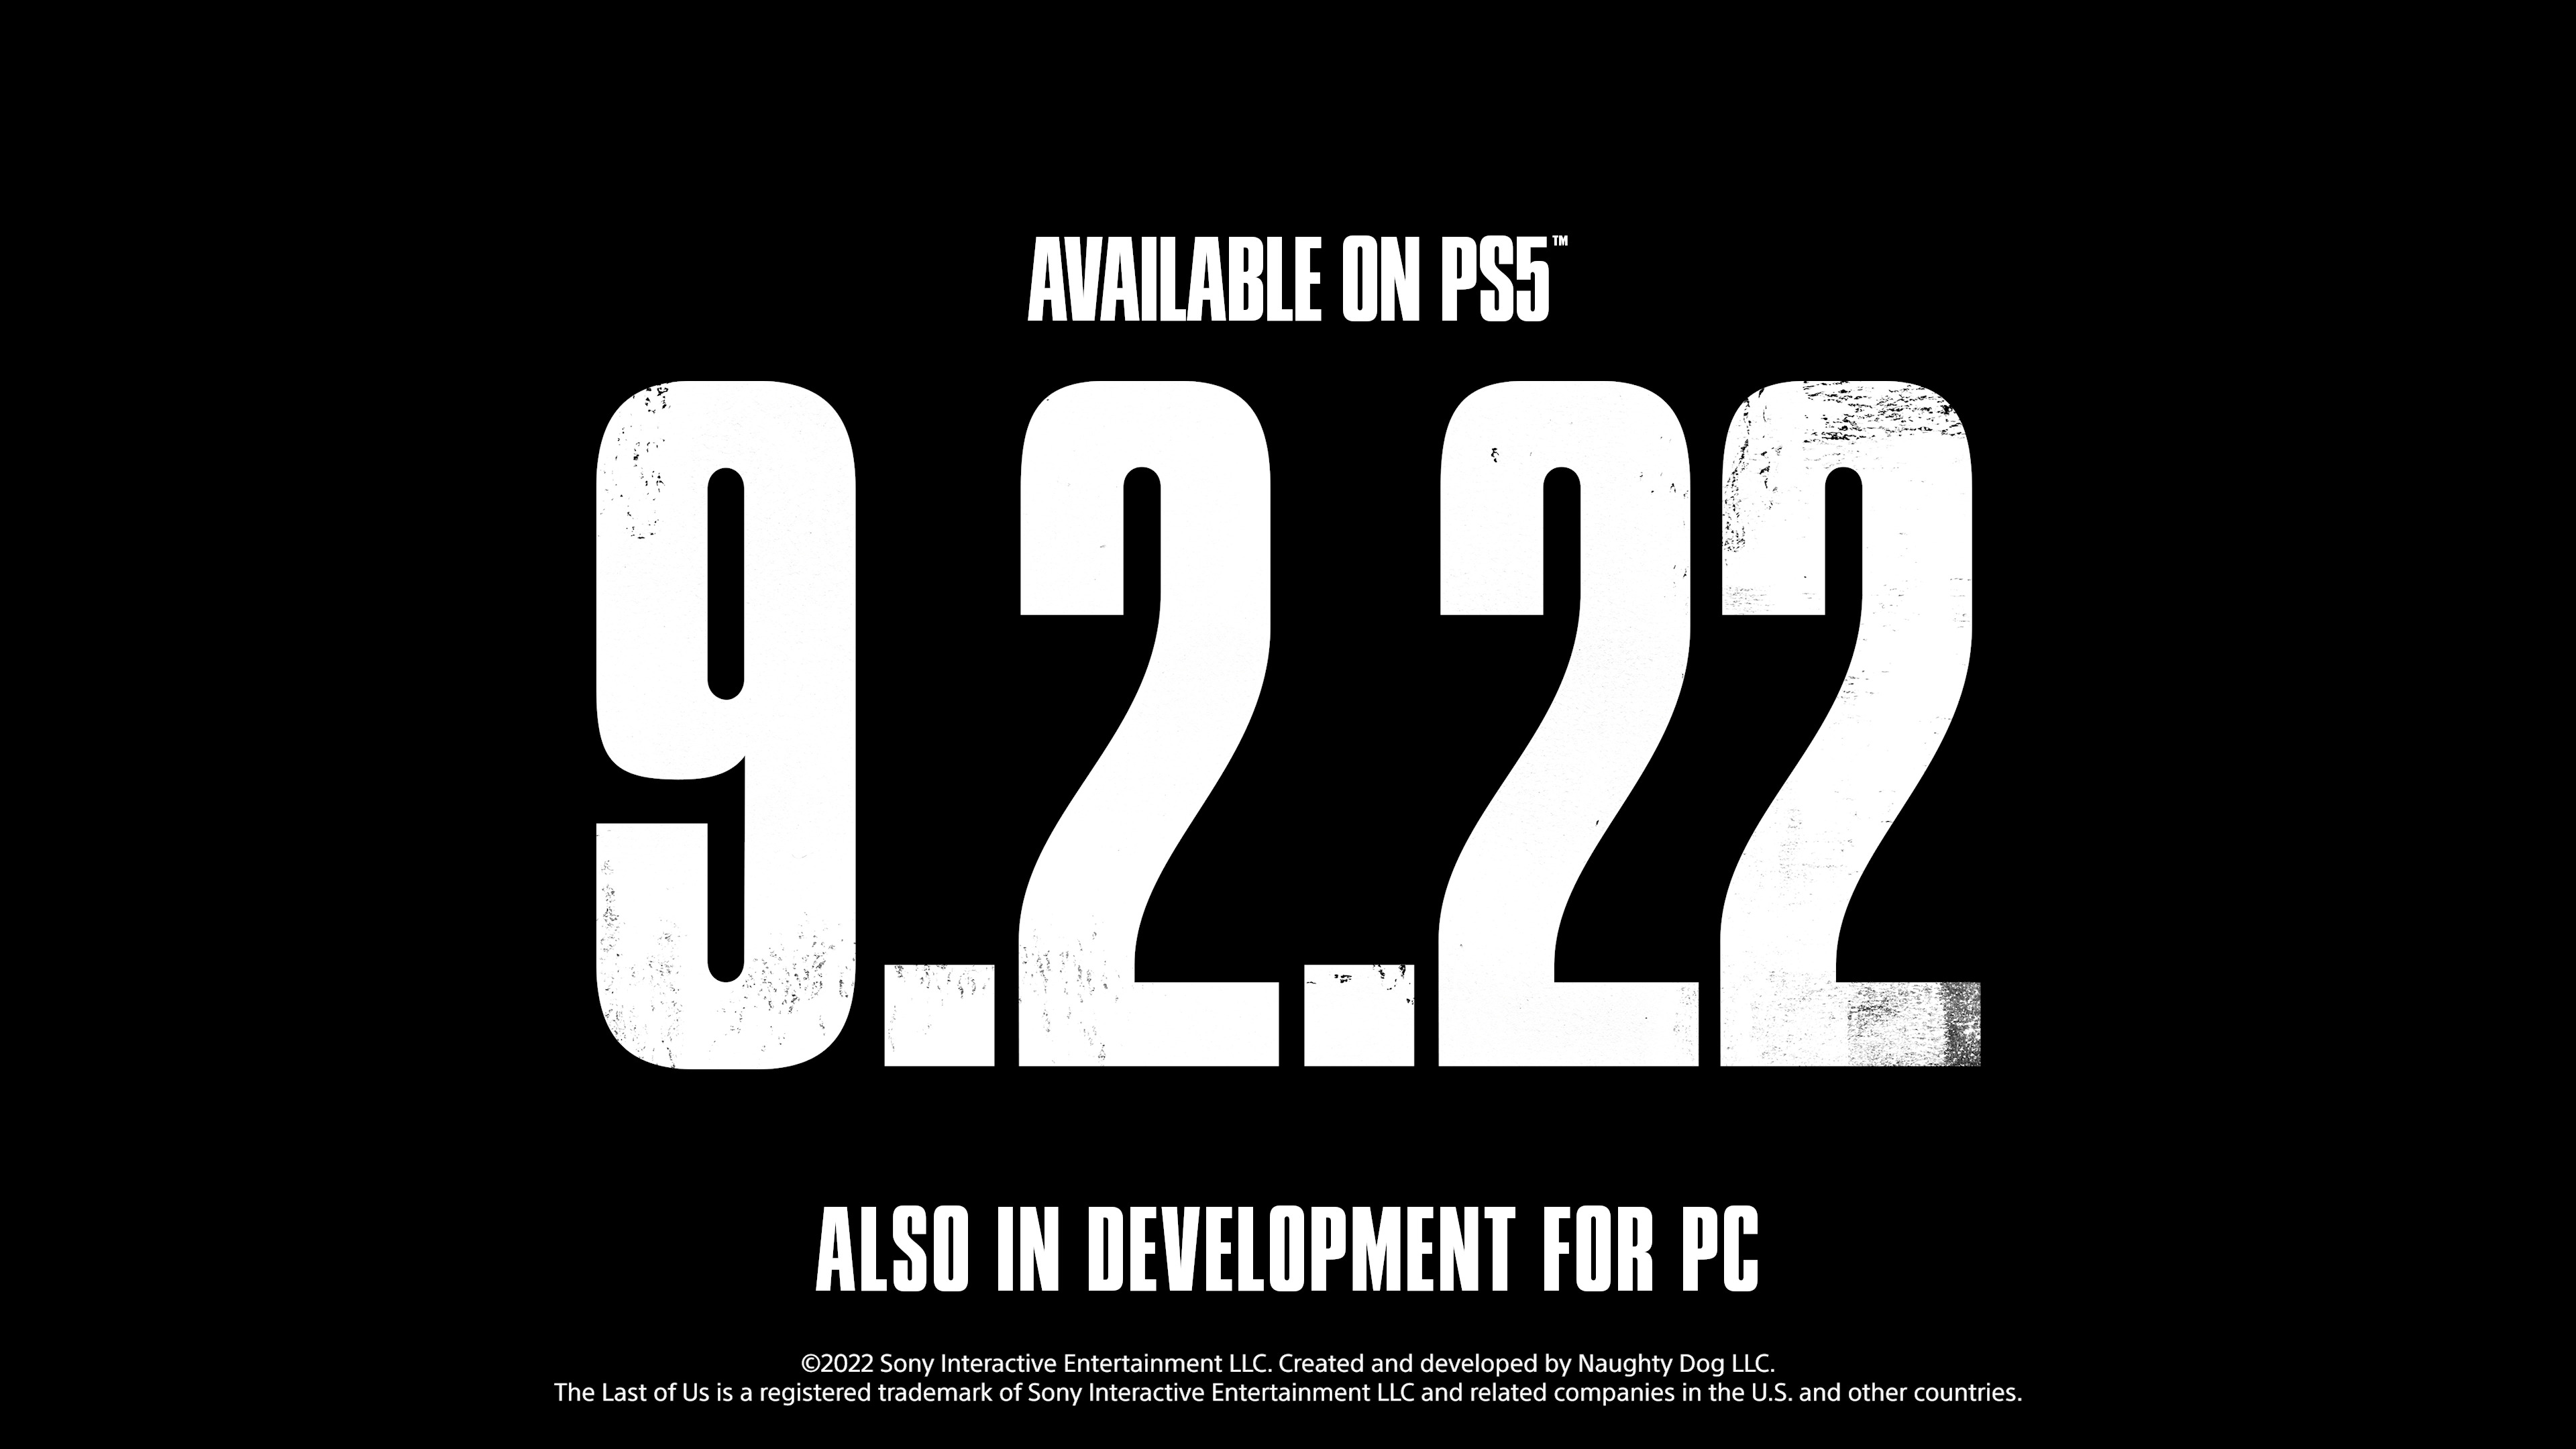 ps5-the-last-of-us-part-1-game-announcement-trailer.jpg